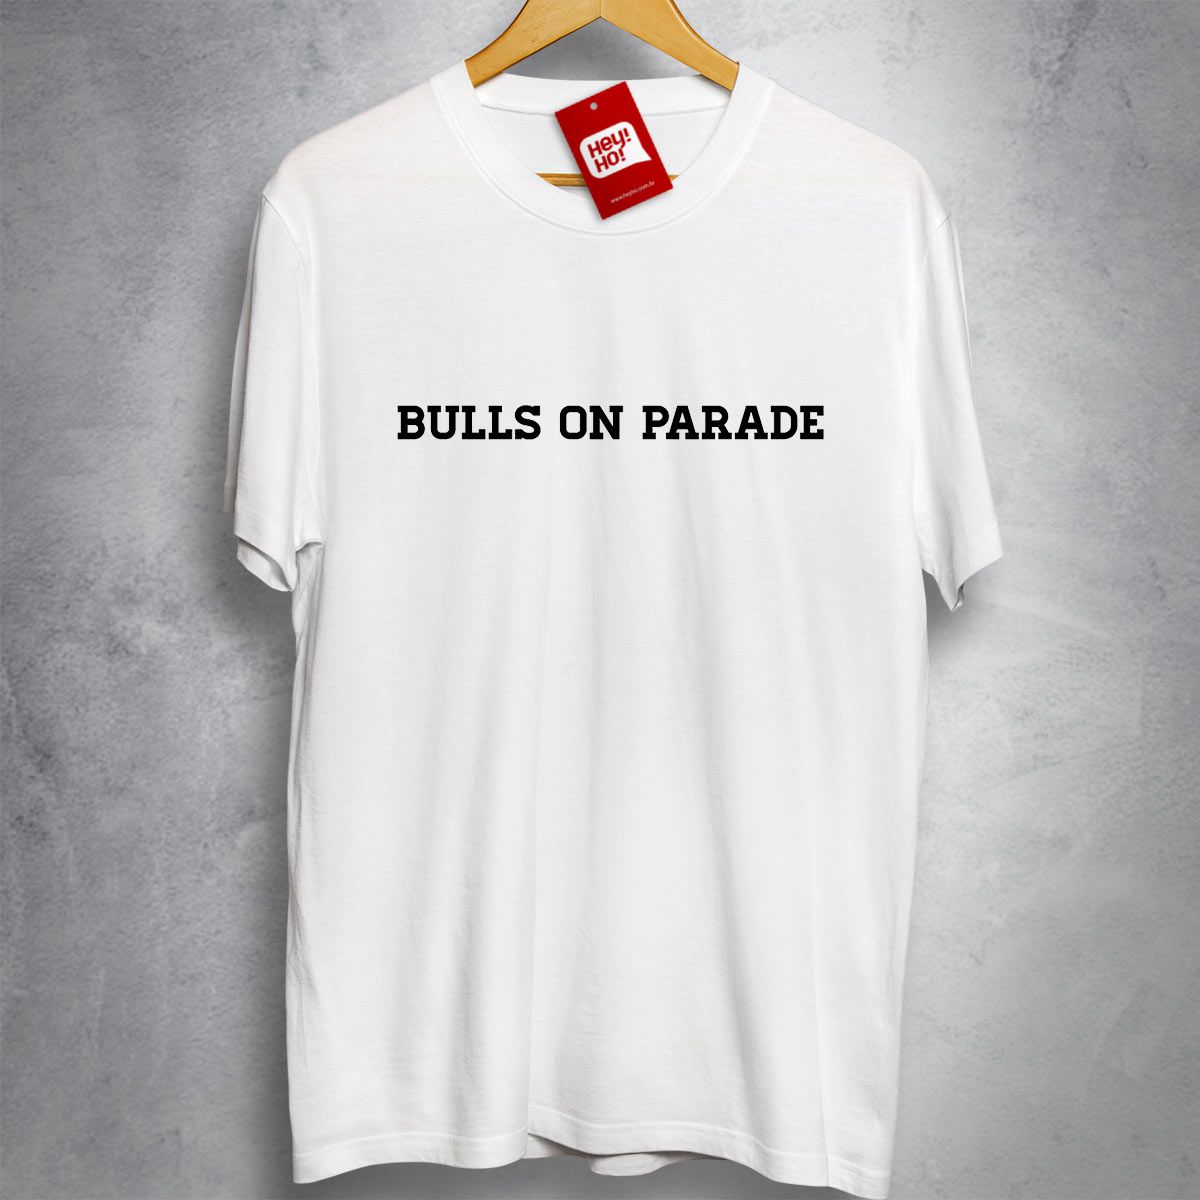 RAGE AGAINST THE MACHINE - Bulls on parade